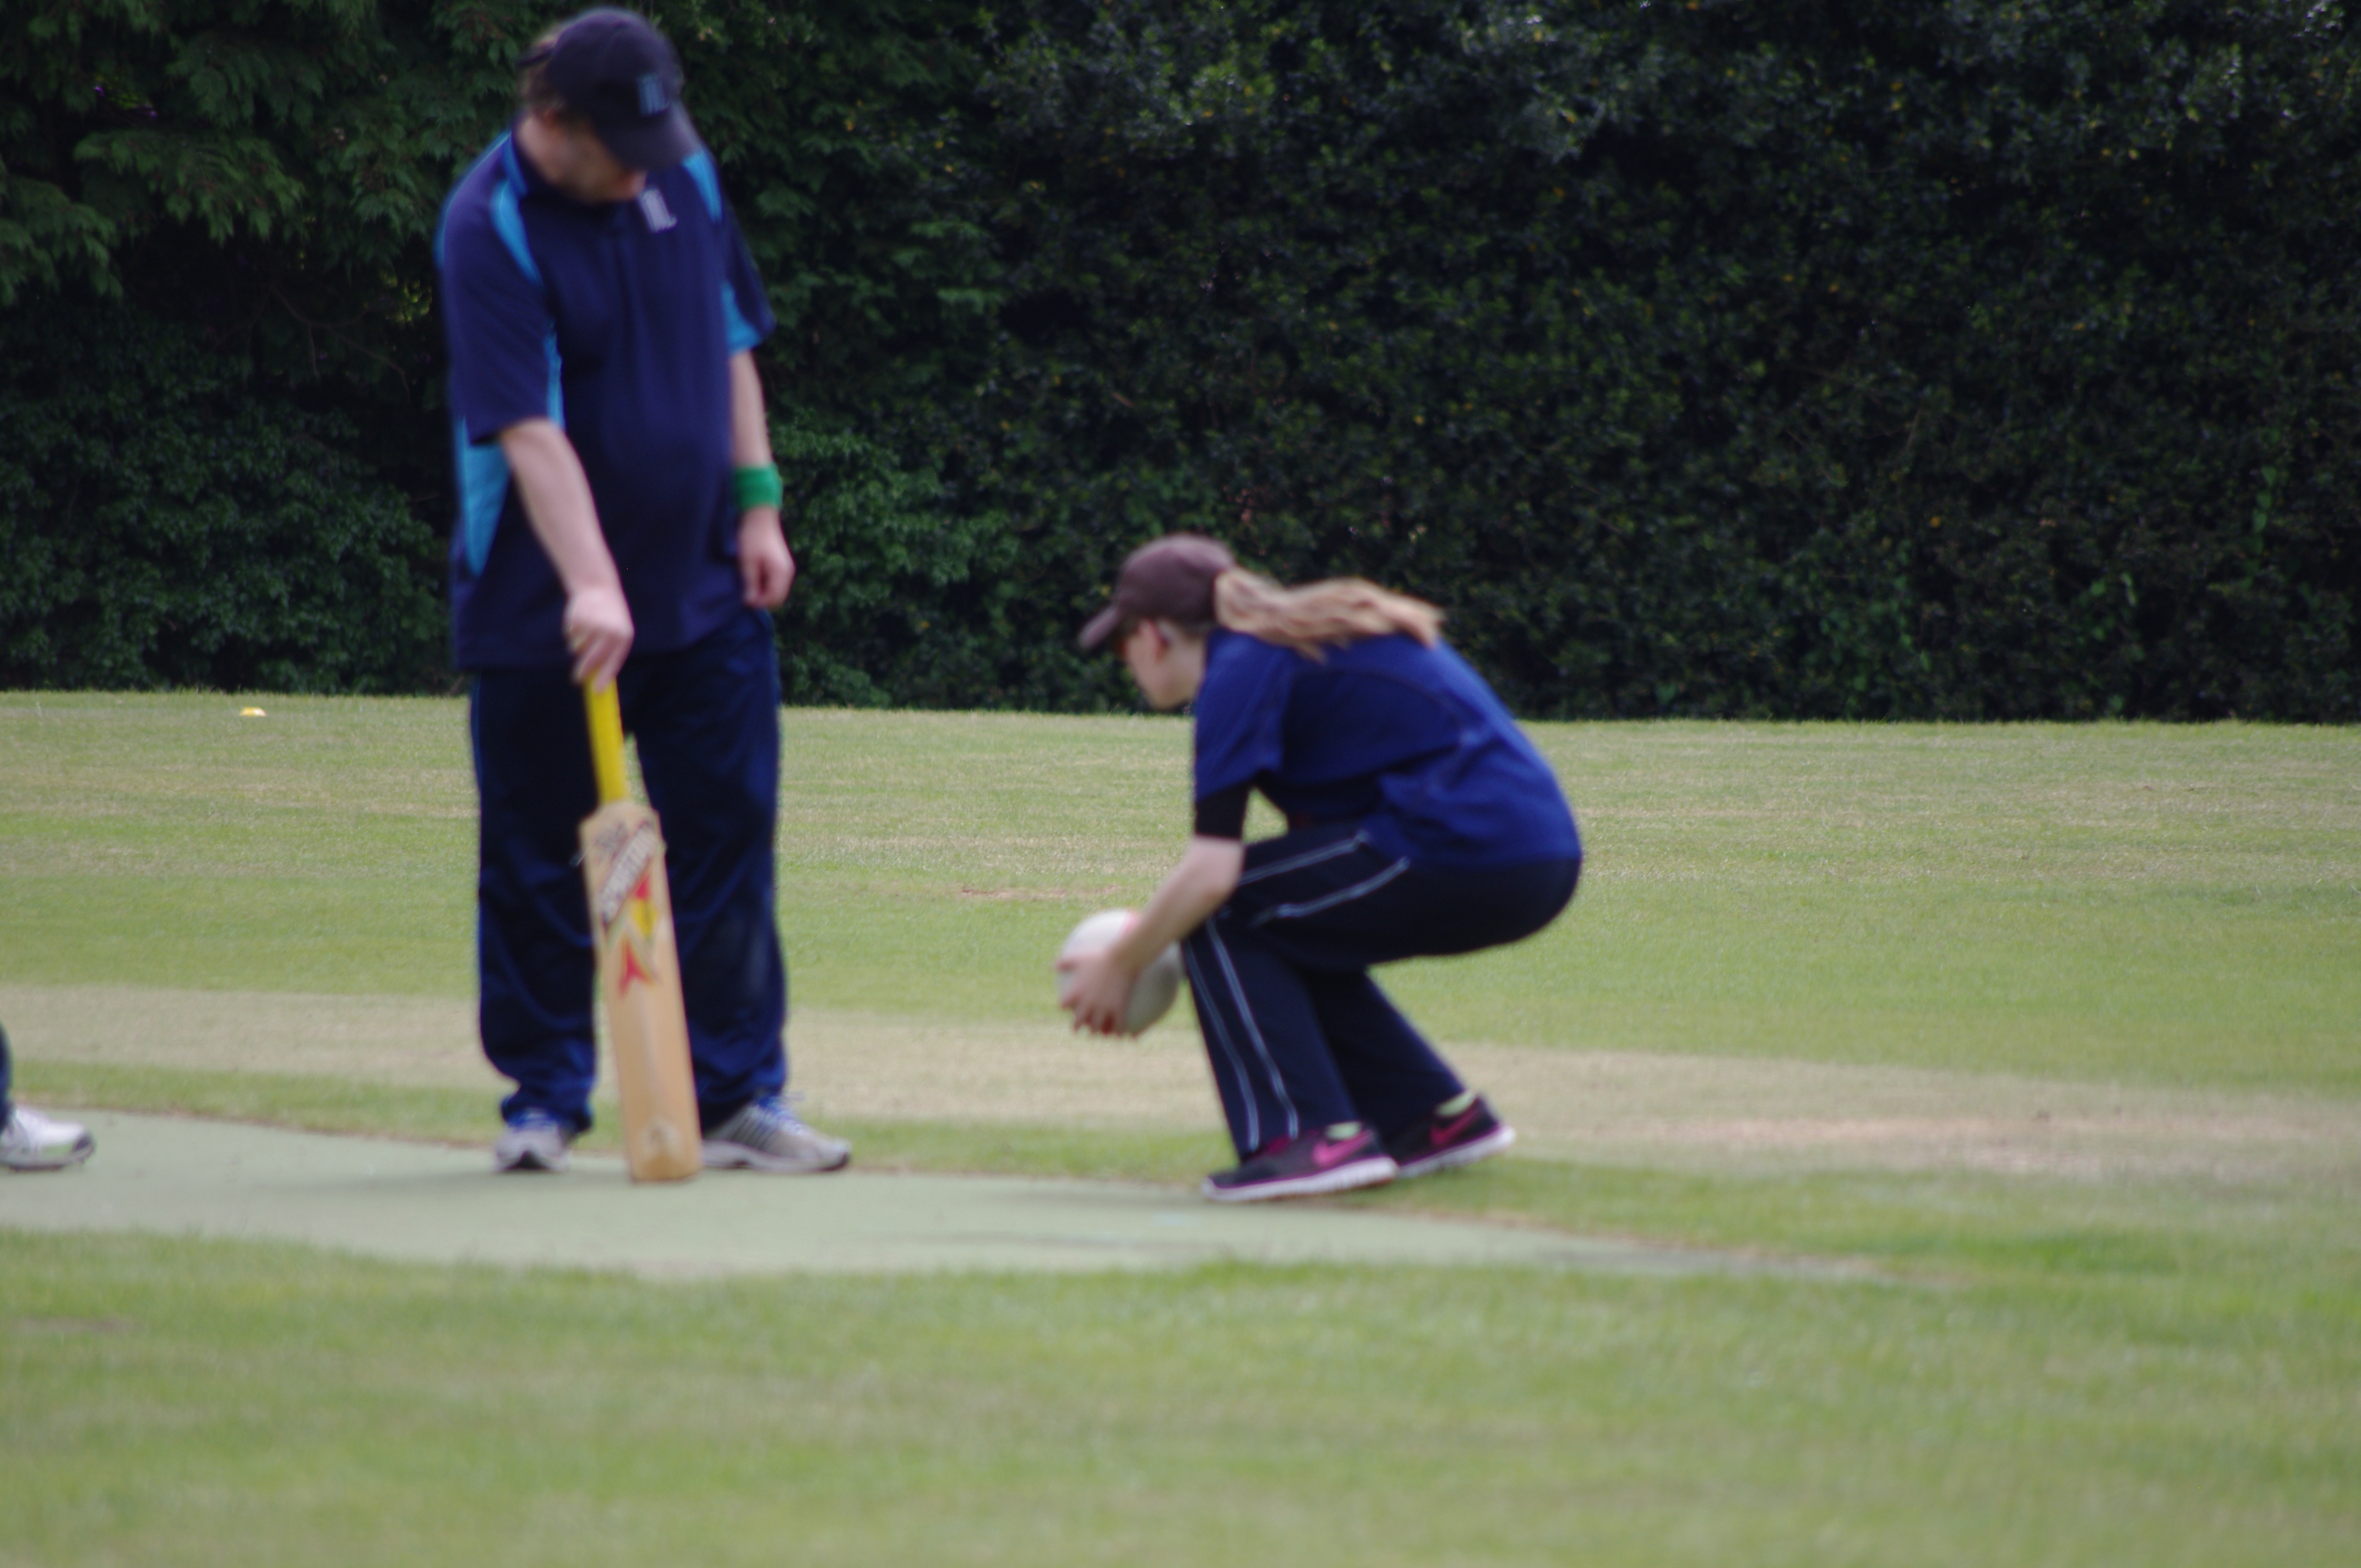 Leanne on the cricket ground